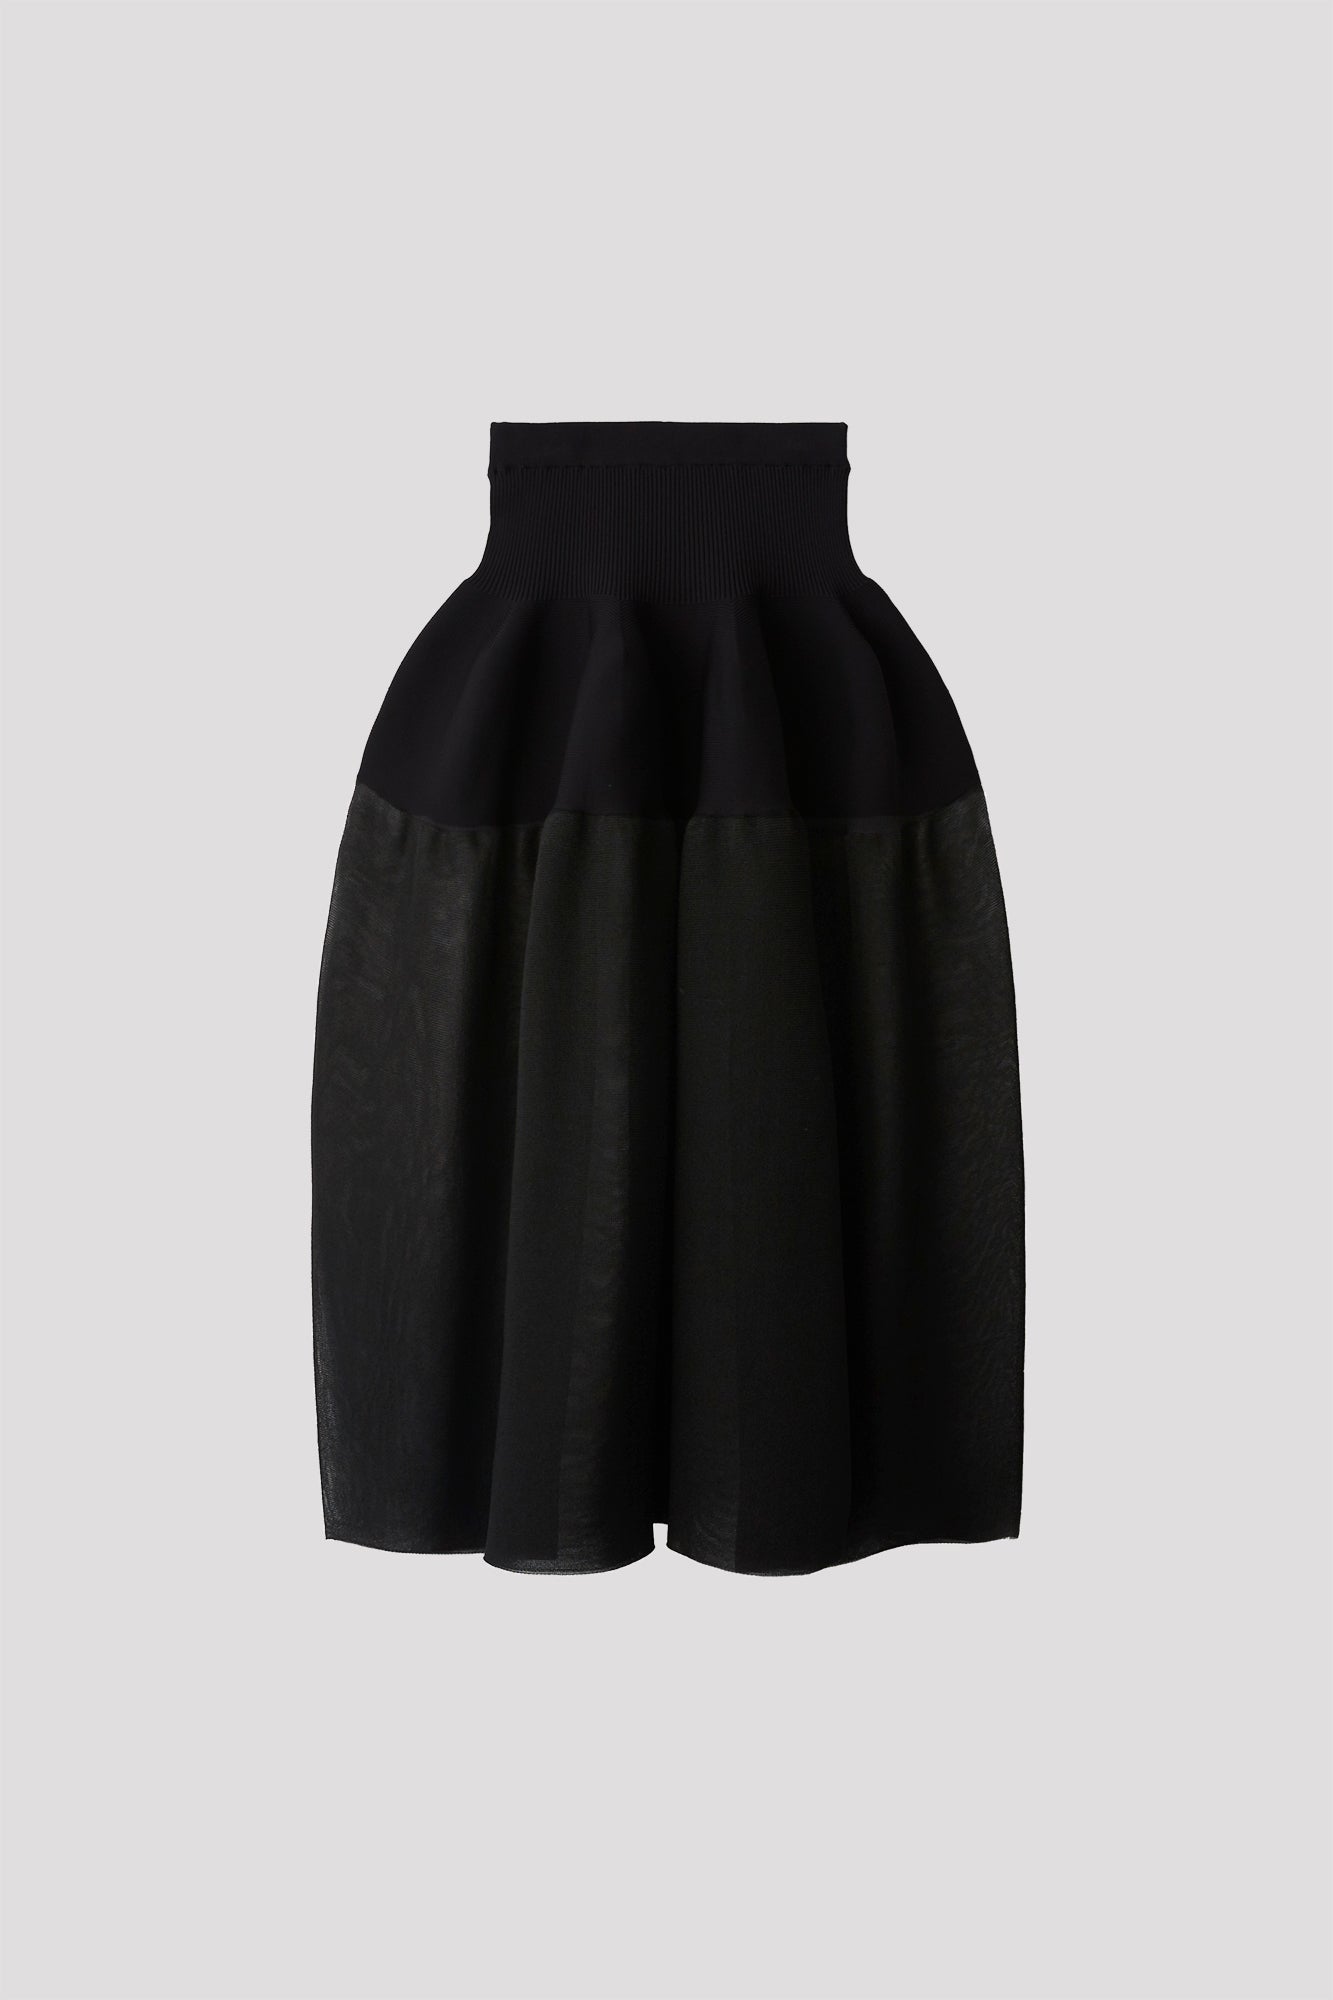 CFCL POTTERY LUCENT SKIRT 1カラーブラック